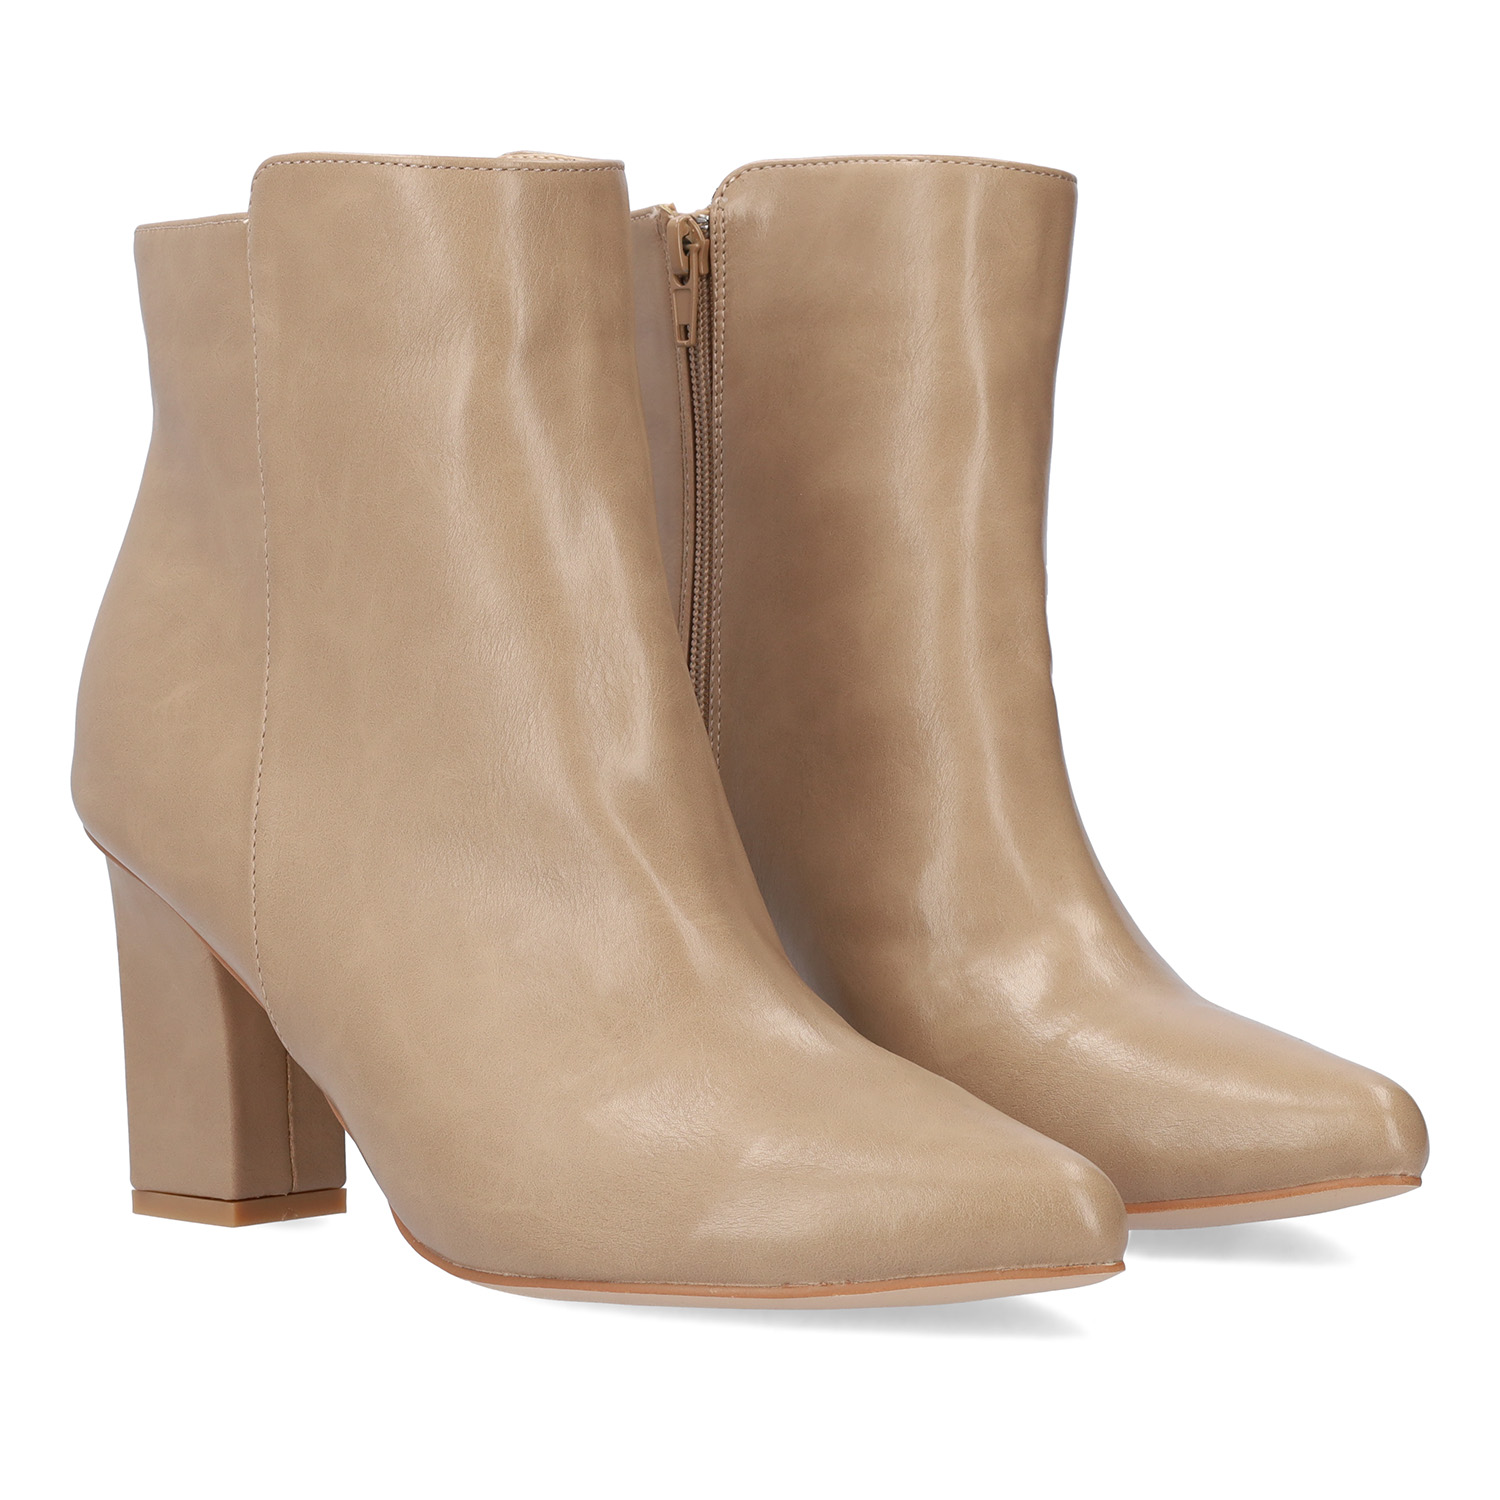 Heeled booties in beige faux leather.